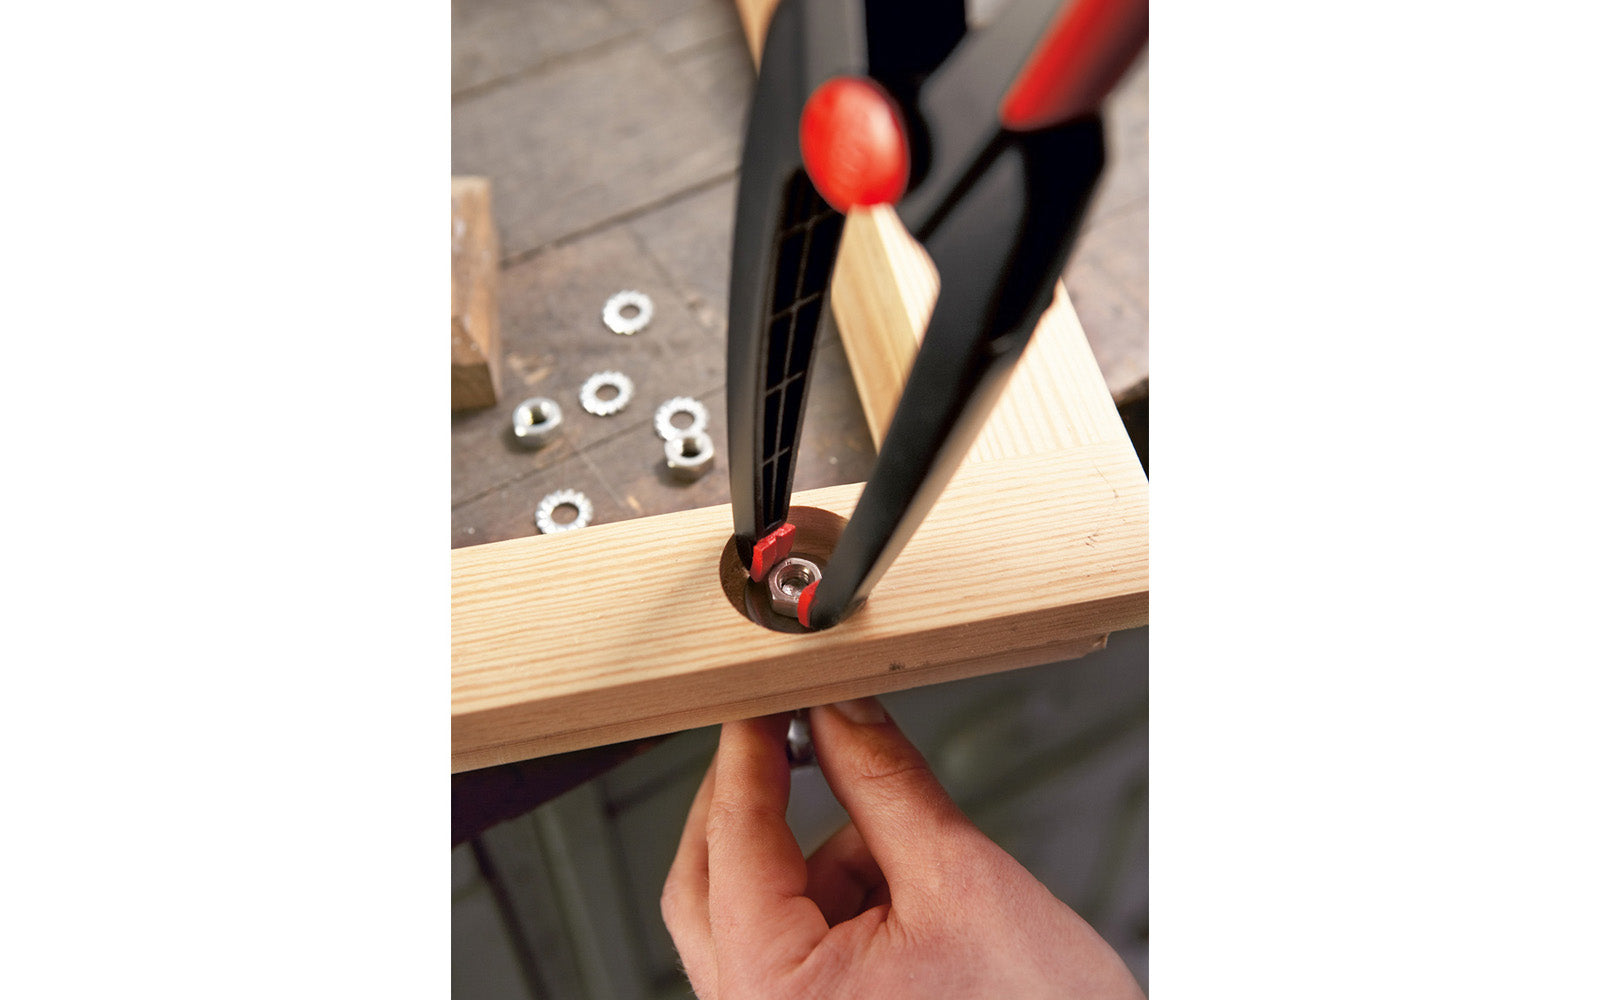 Bessey Clamps Model No. XCL2 - These Long tapered nose spring clamp from Bessey have a tapered nose & can get into hard-to-reach areas. They have soft-touch pads that prevent marring of delicate work. 2